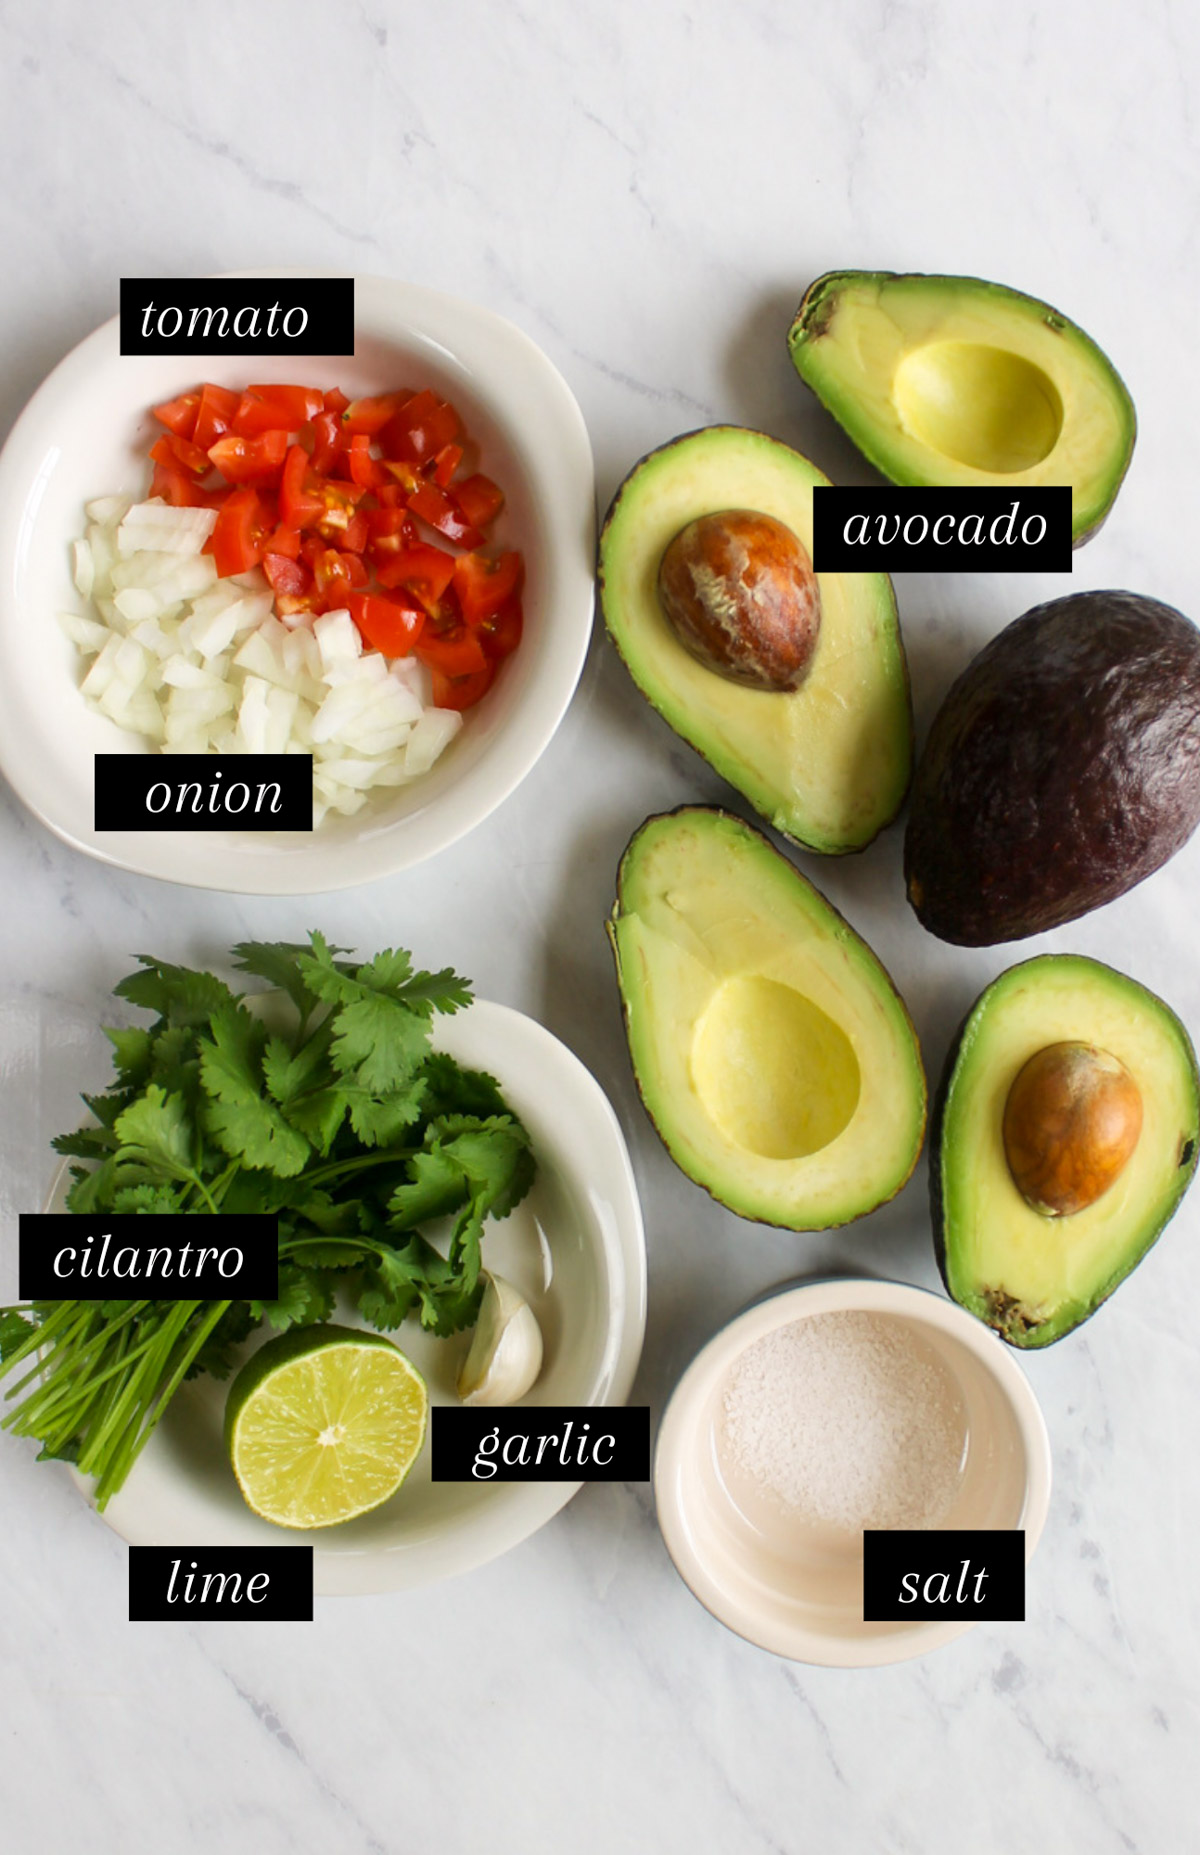 Labeled ingredients for guacamole.